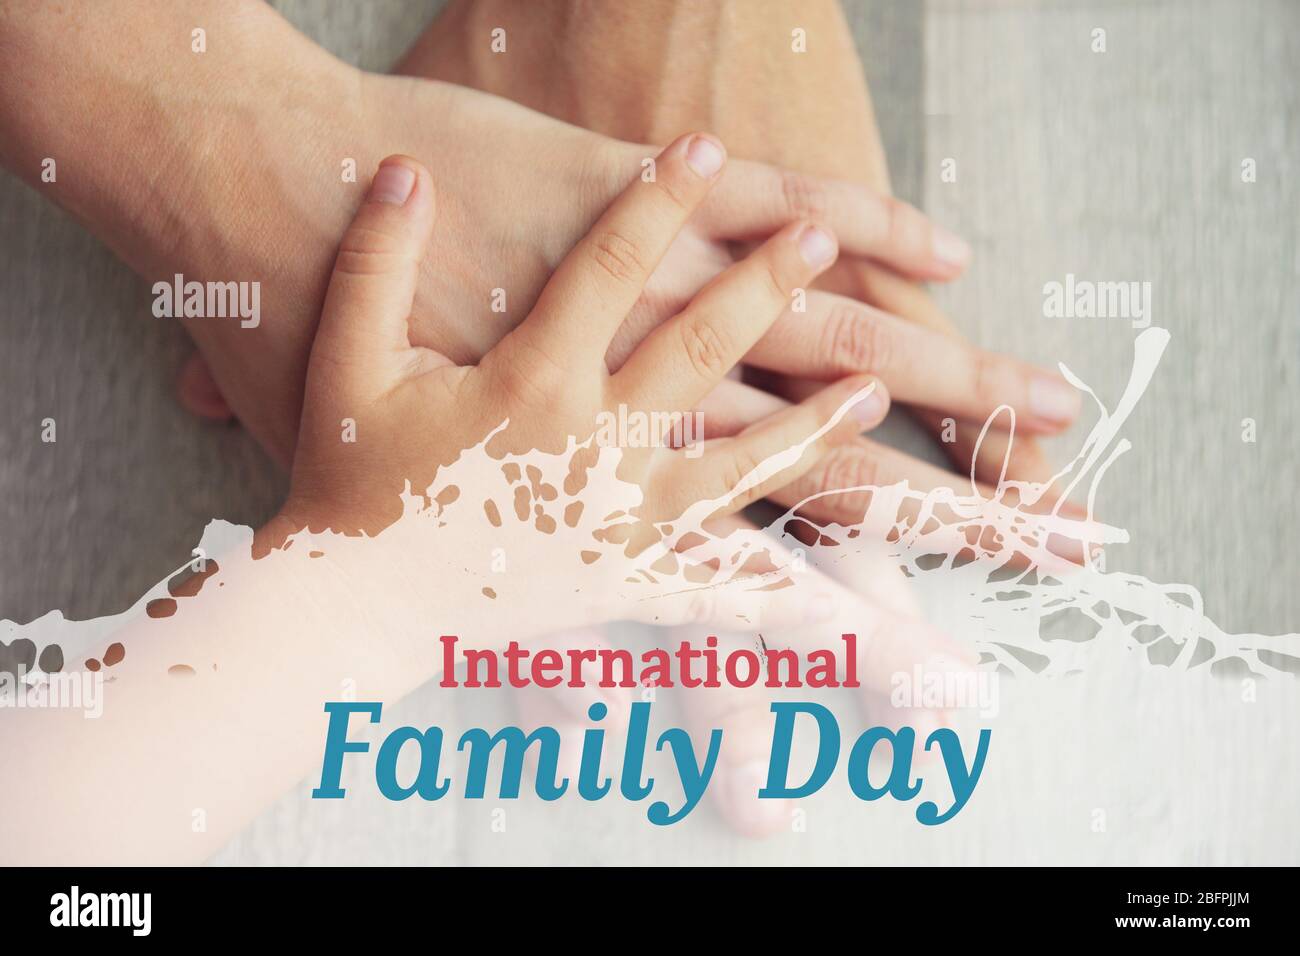 Text INTERNATIONAL FAMILY DAY and hands of parents with child on background. Holiday concept Stock Photo